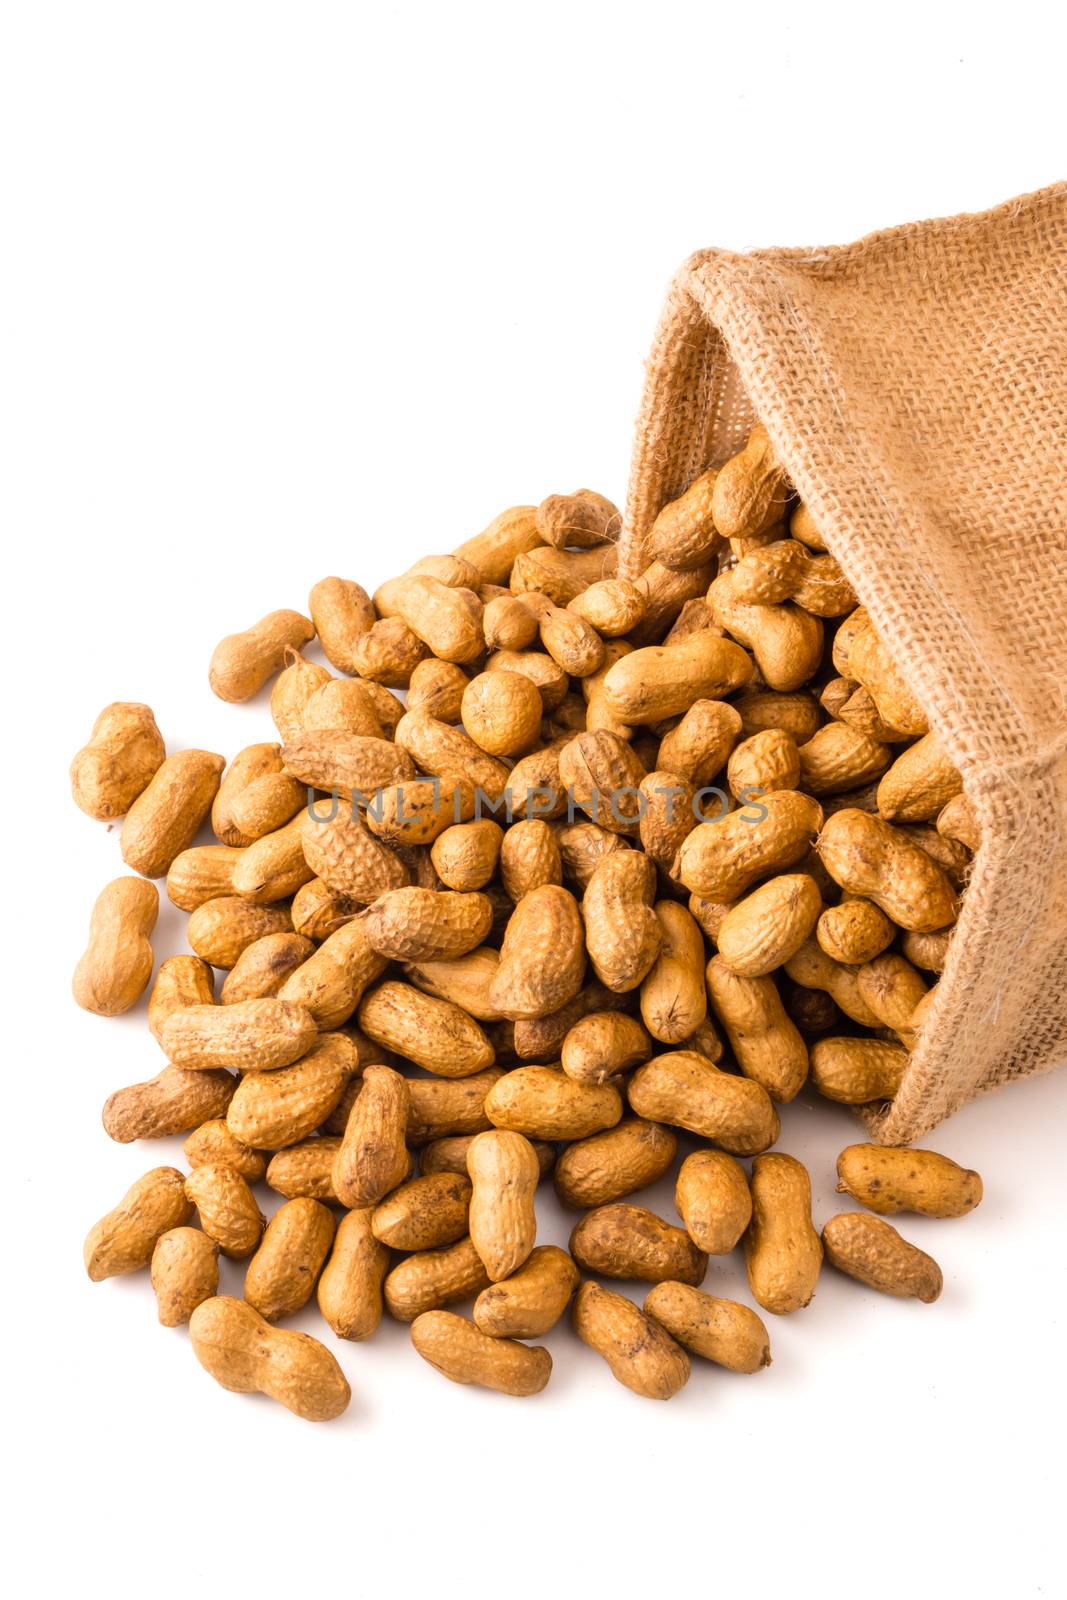 Peanuts in burlap bag on white background. by ronnarong